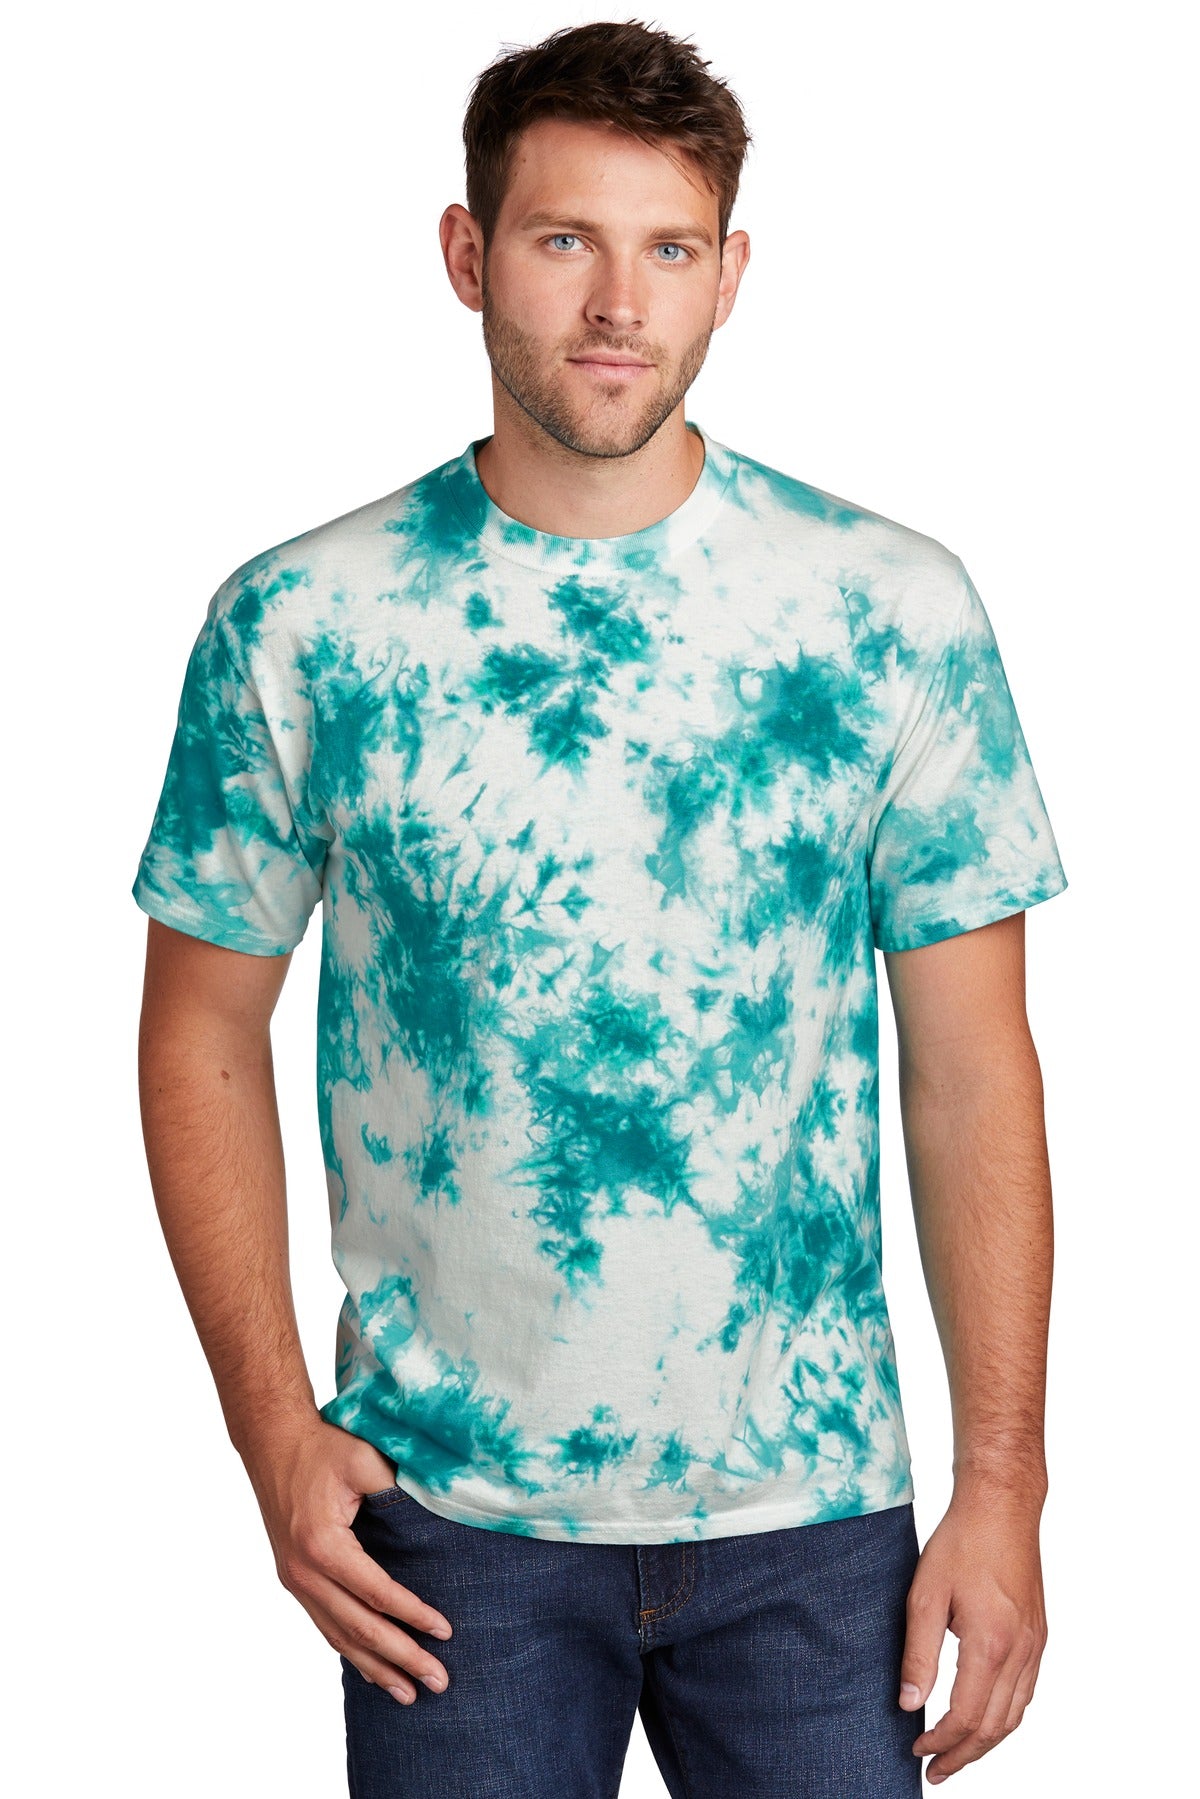 PC145-Teal-S